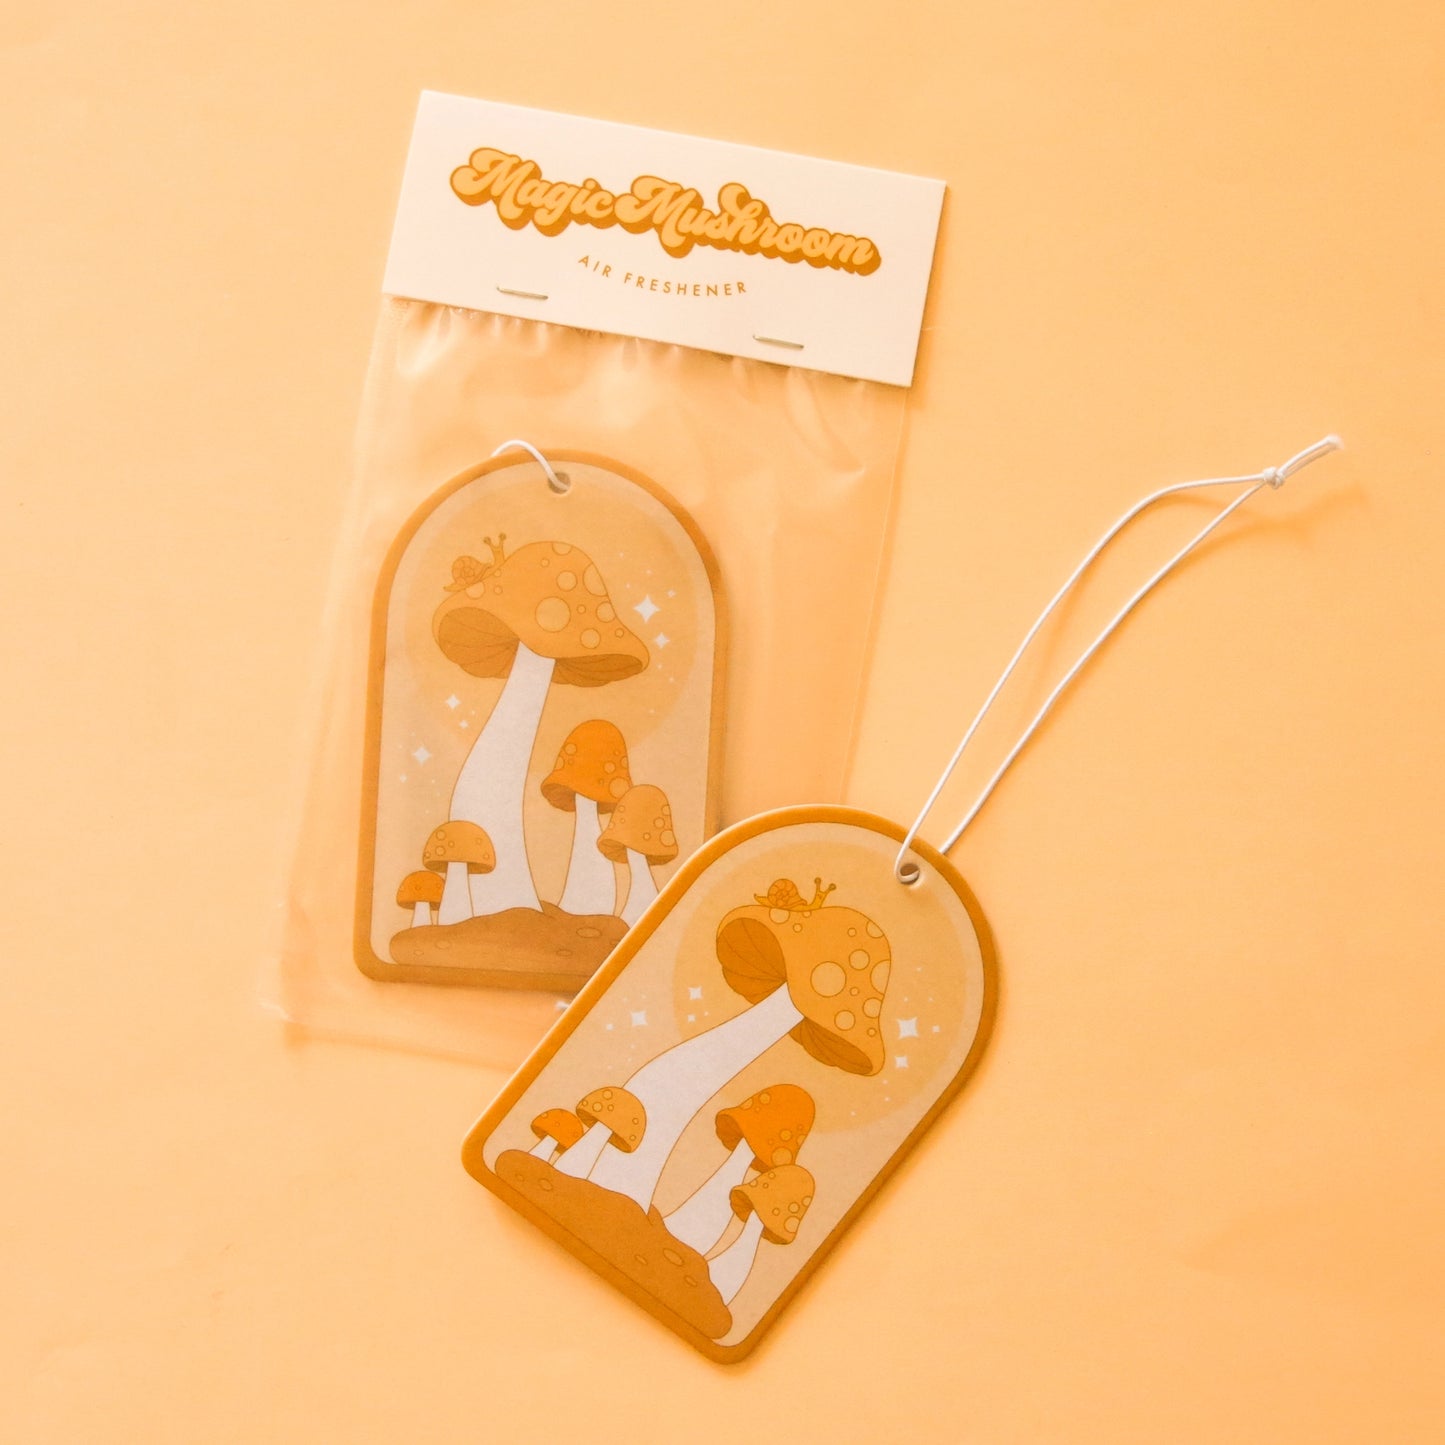 On a light orange background is an arched shaped air freshener with an orange mushroom design and a white elastic loop for hanging. 